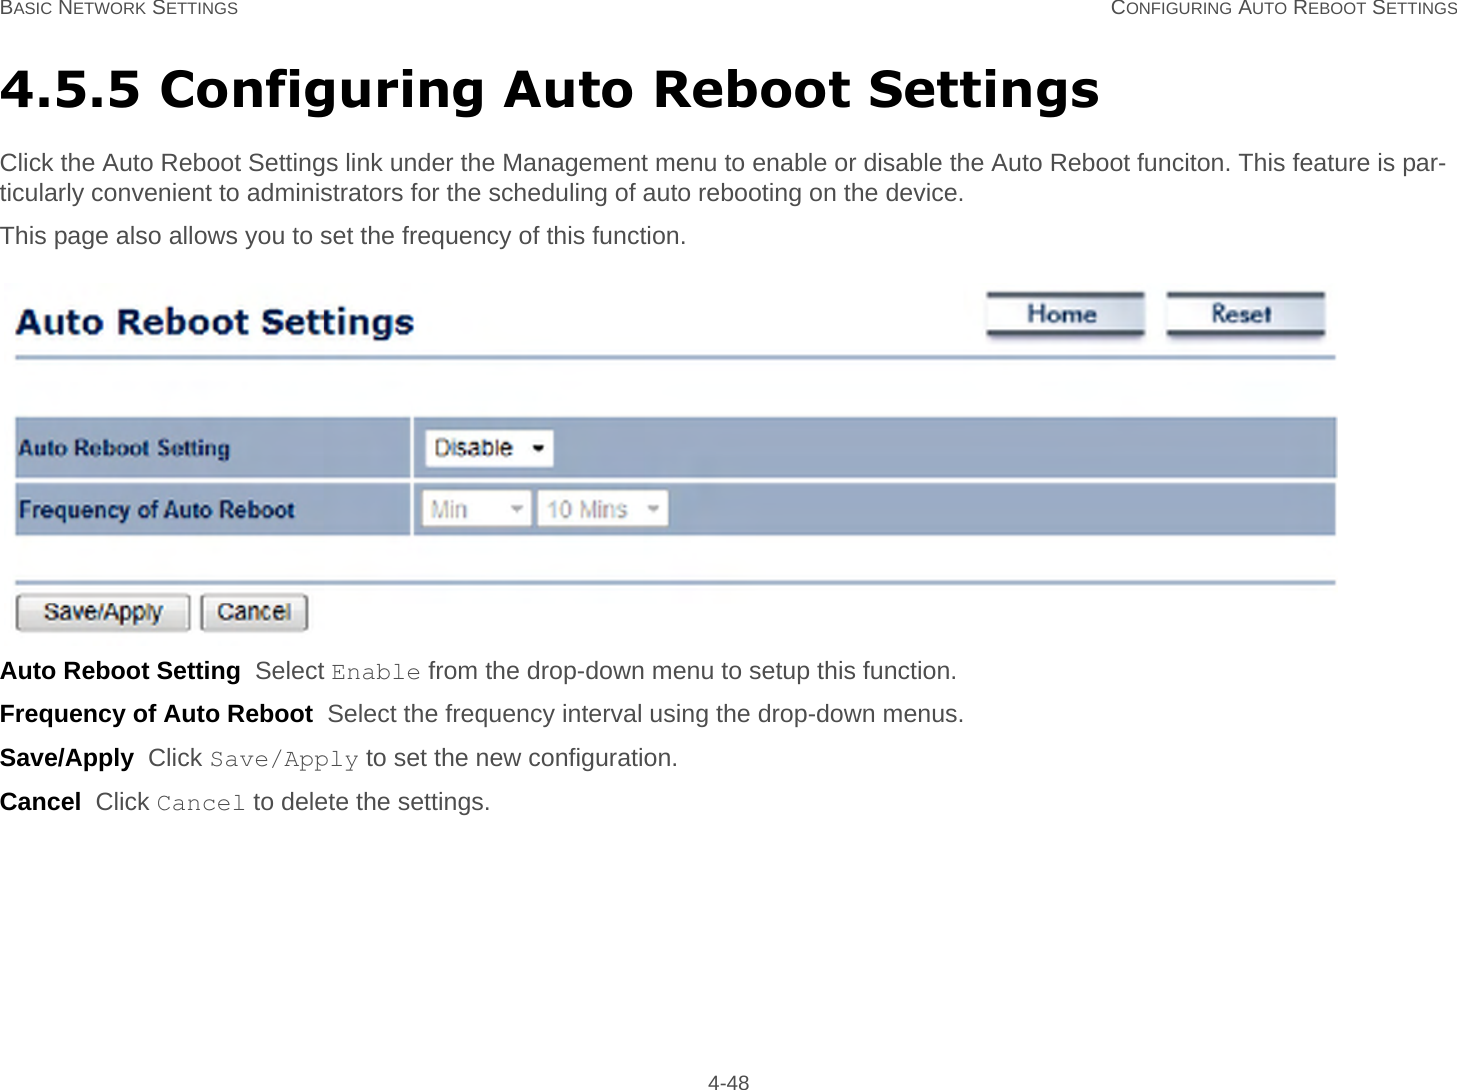 BASIC NETWORK SETTINGS CONFIGURING AUTO REBOOT SETTINGS 4-484.5.5 Configuring Auto Reboot SettingsClick the Auto Reboot Settings link under the Management menu to enable or disable the Auto Reboot funciton. This feature is par-ticularly convenient to administrators for the scheduling of auto rebooting on the device.This page also allows you to set the frequency of this function.Auto Reboot Setting  Select Enable from the drop-down menu to setup this function.Frequency of Auto Reboot  Select the frequency interval using the drop-down menus.Save/Apply  Click Save/Apply to set the new configuration.Cancel  Click Cancel to delete the settings.